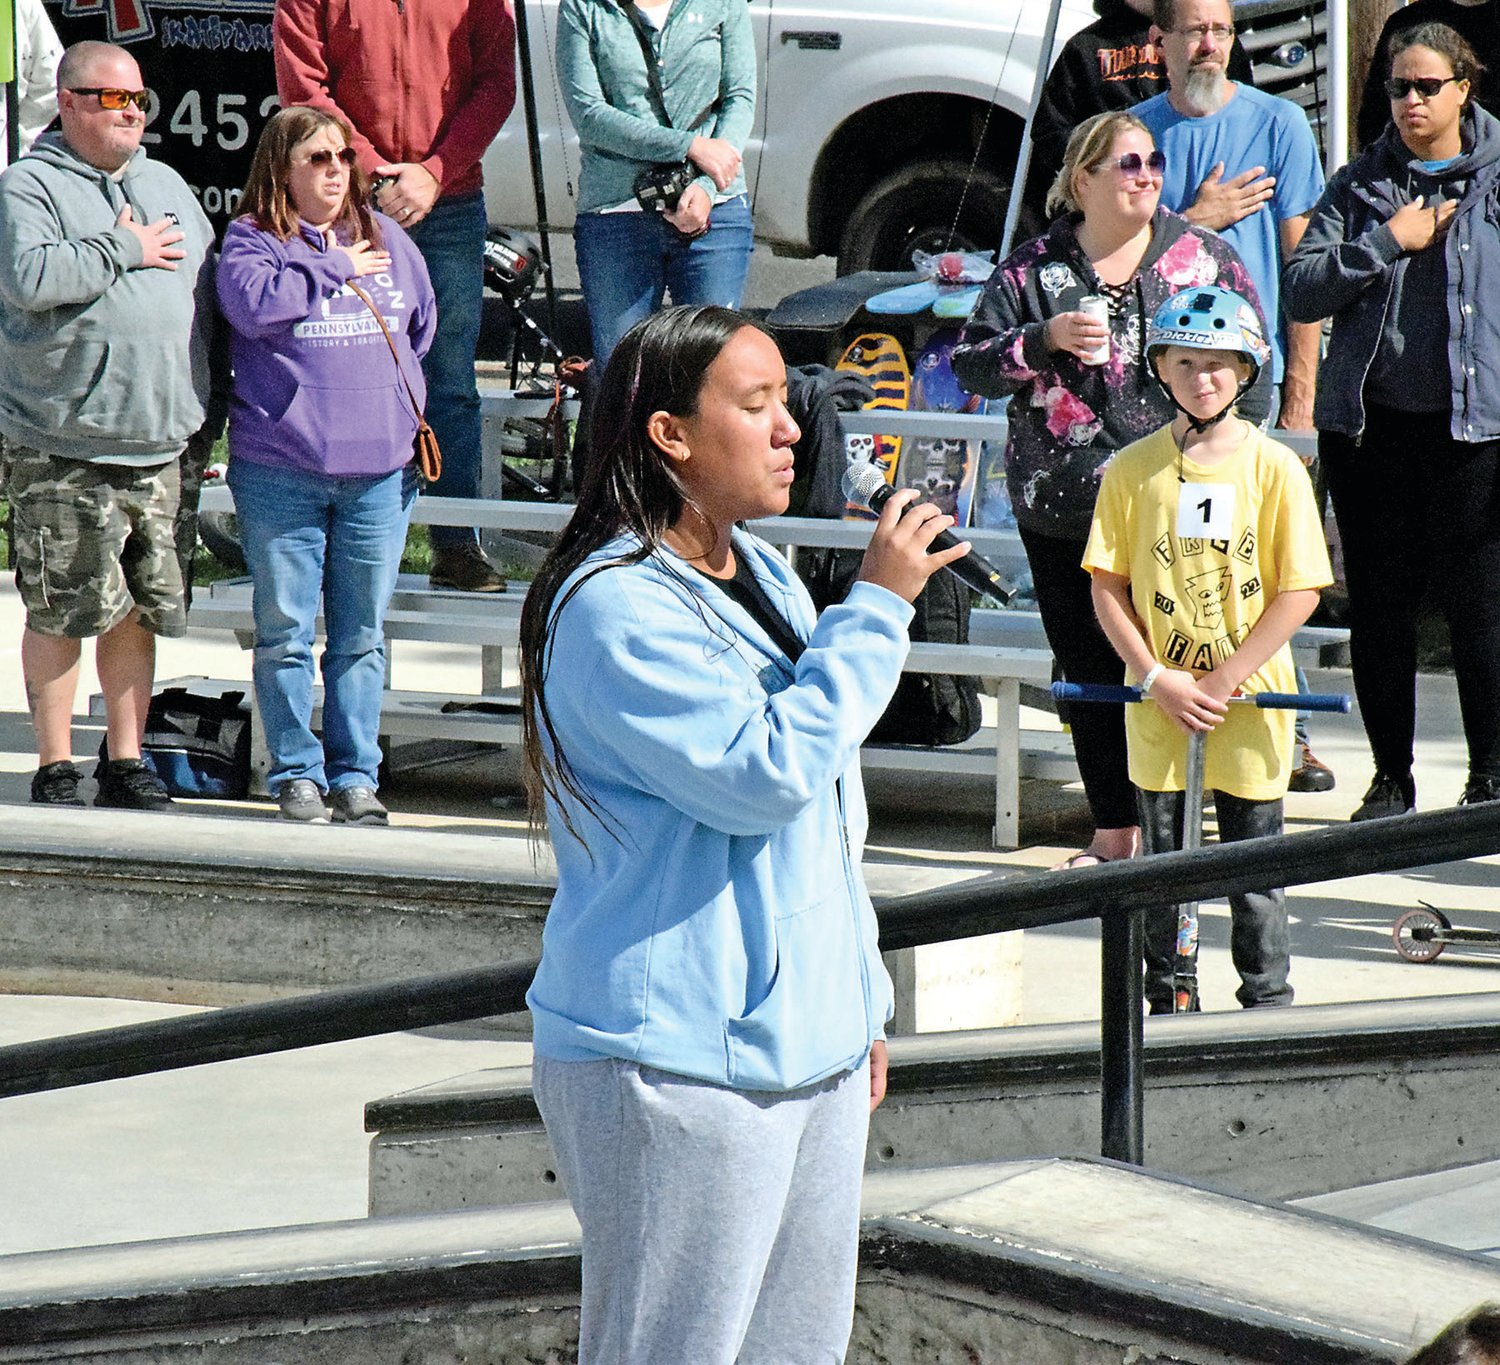 Jadyn Fuentes, a Bucks County Community College student, sings the national anthem.